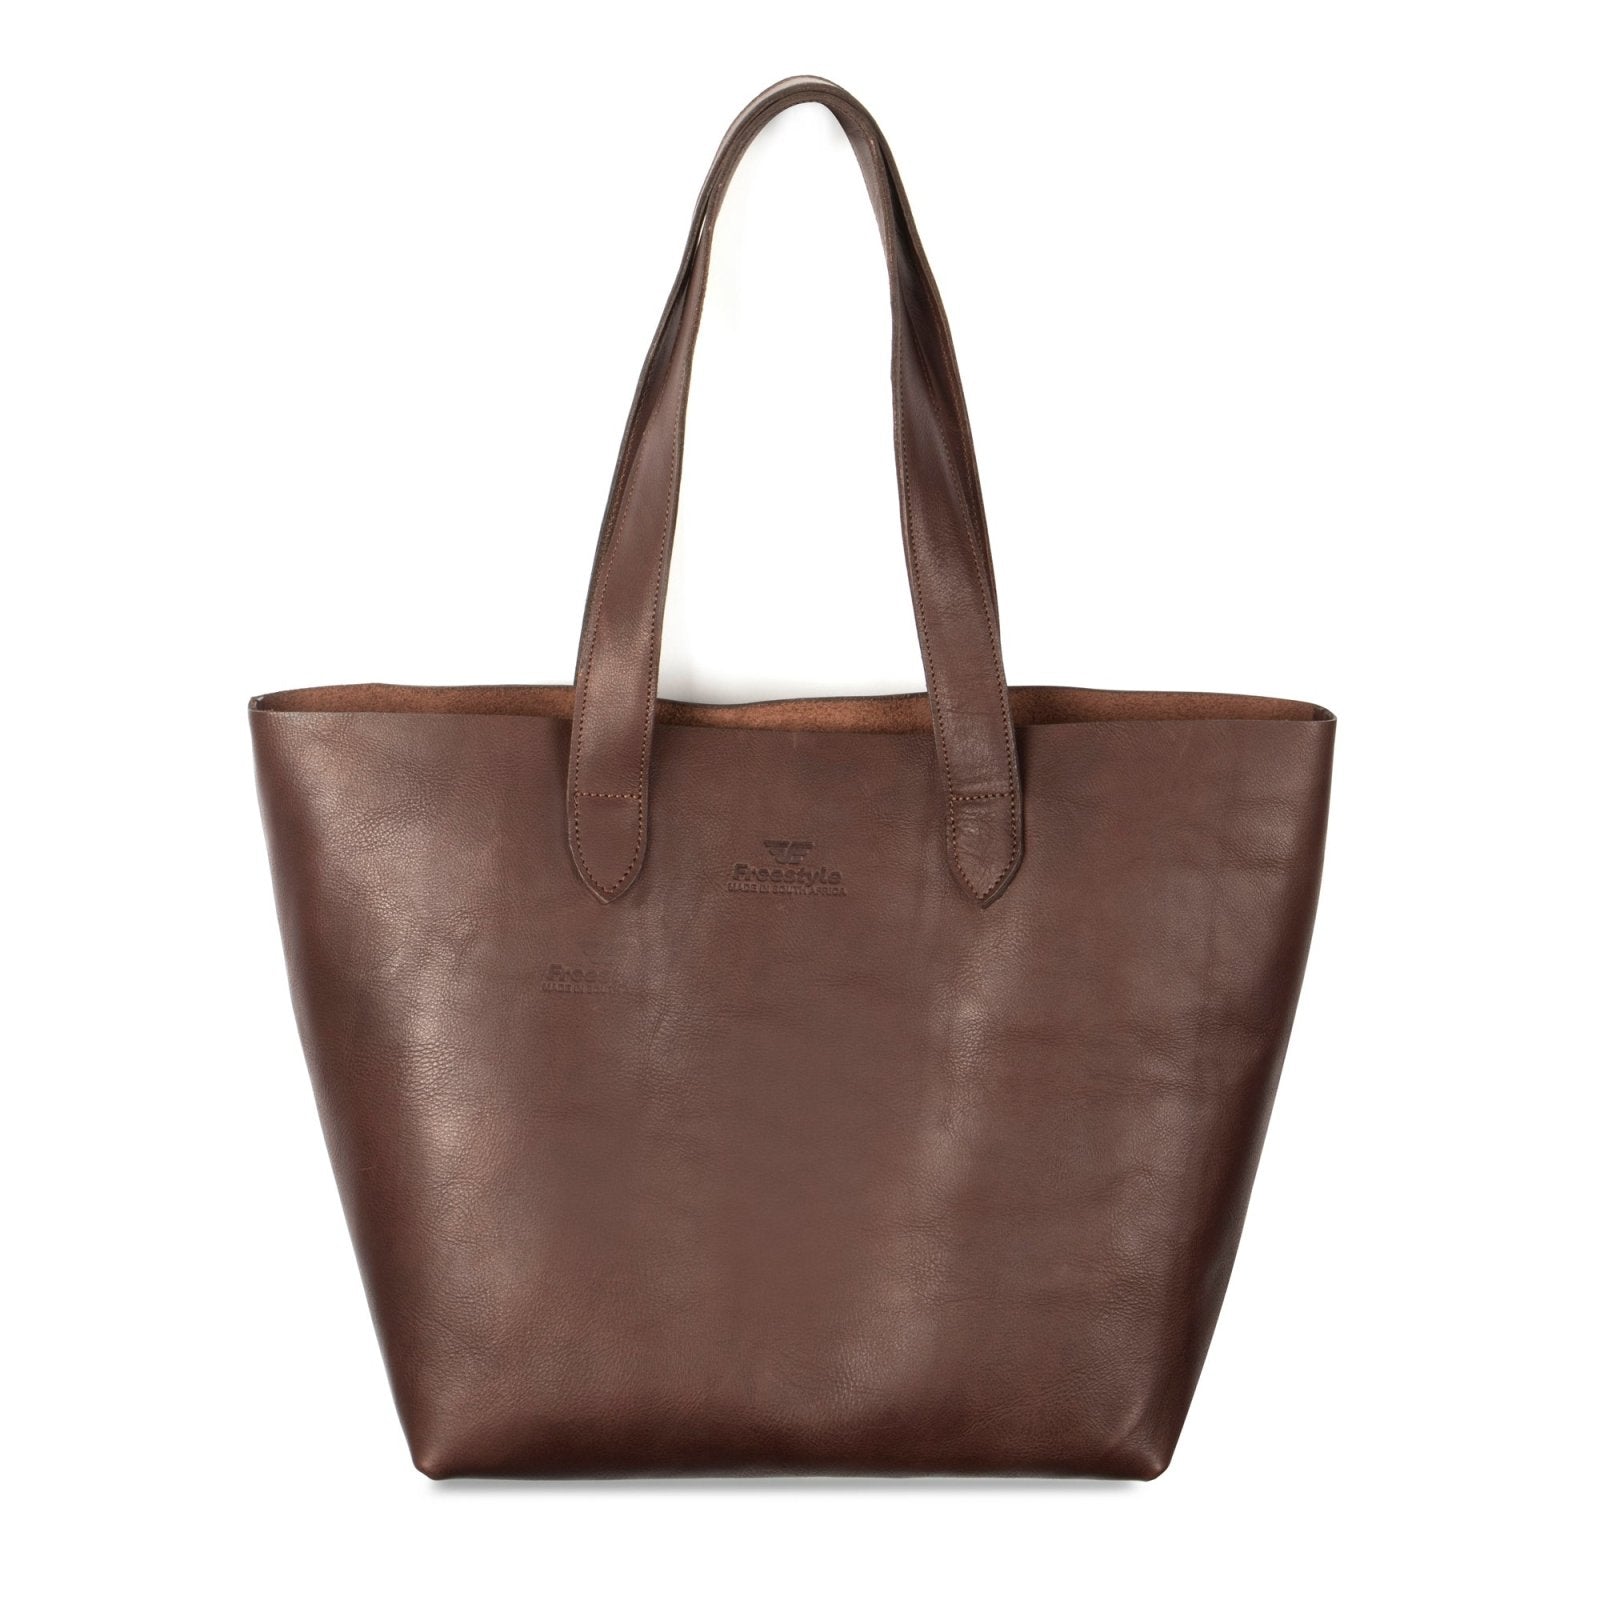 Vega Unlined Premium Leather Shopper Bag - Freestyle SA Proudly local leather boots veldskoens vellies leather shoes suede veldskoens